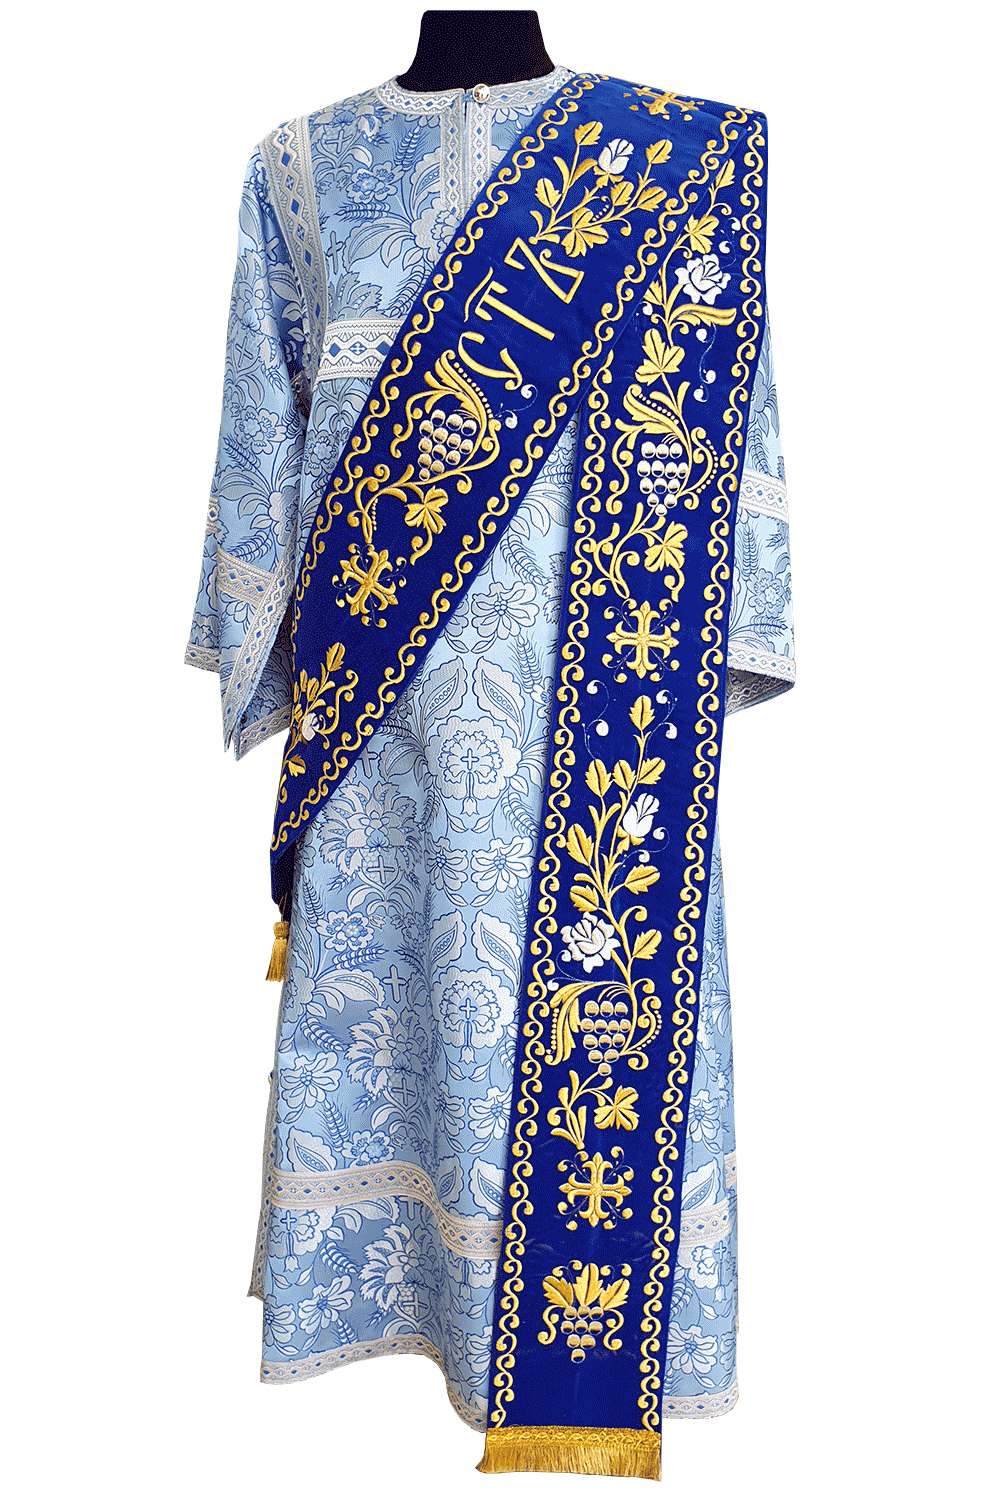 Embroidered double orarion blue